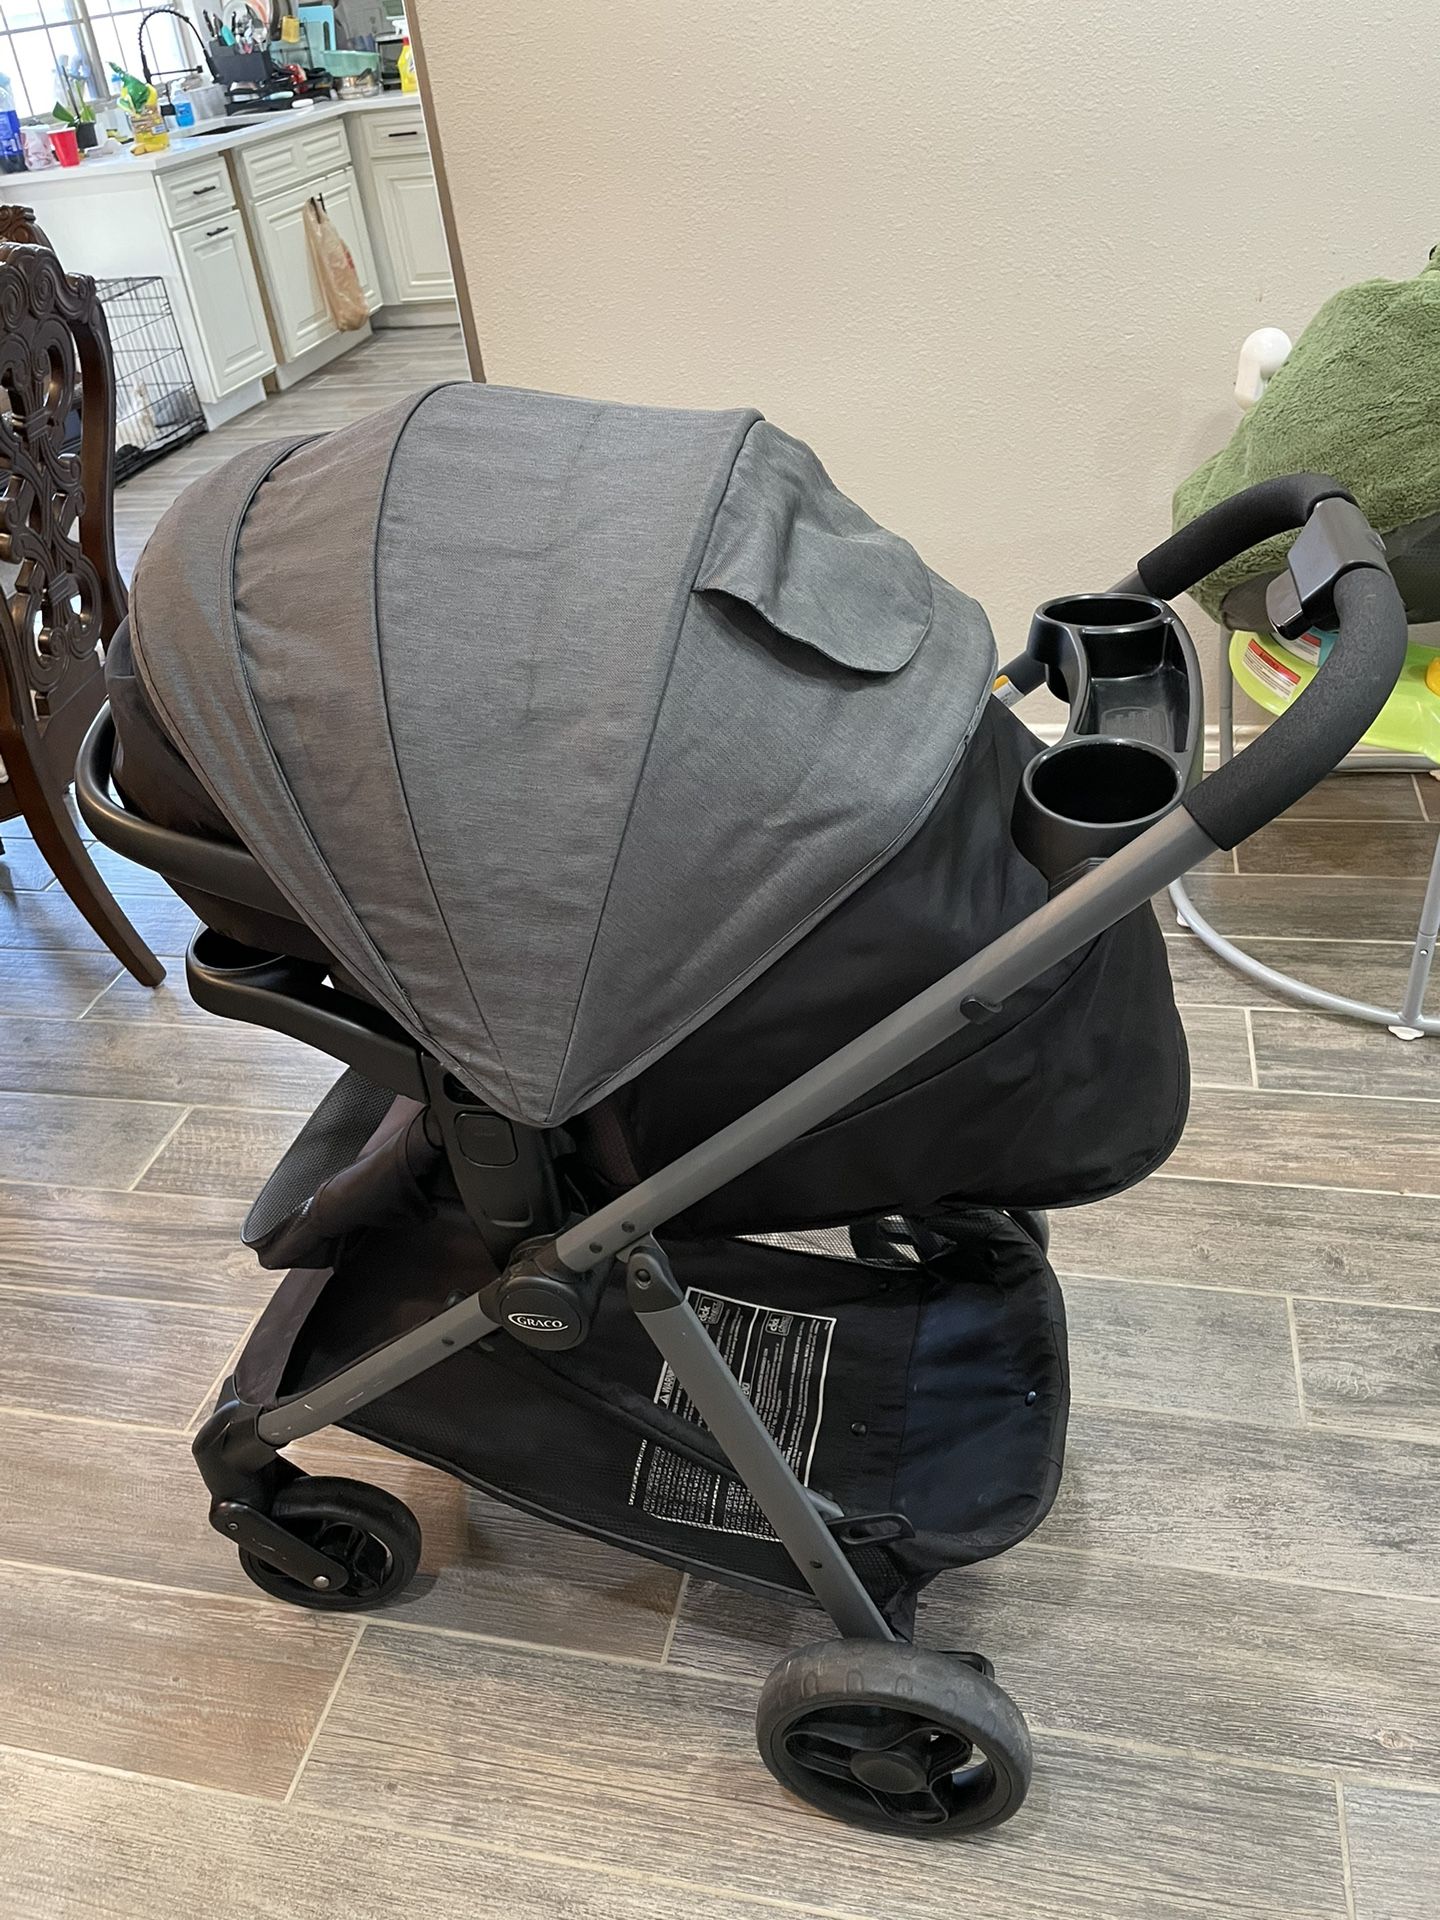 Graco Stroller With Infant Car Seat